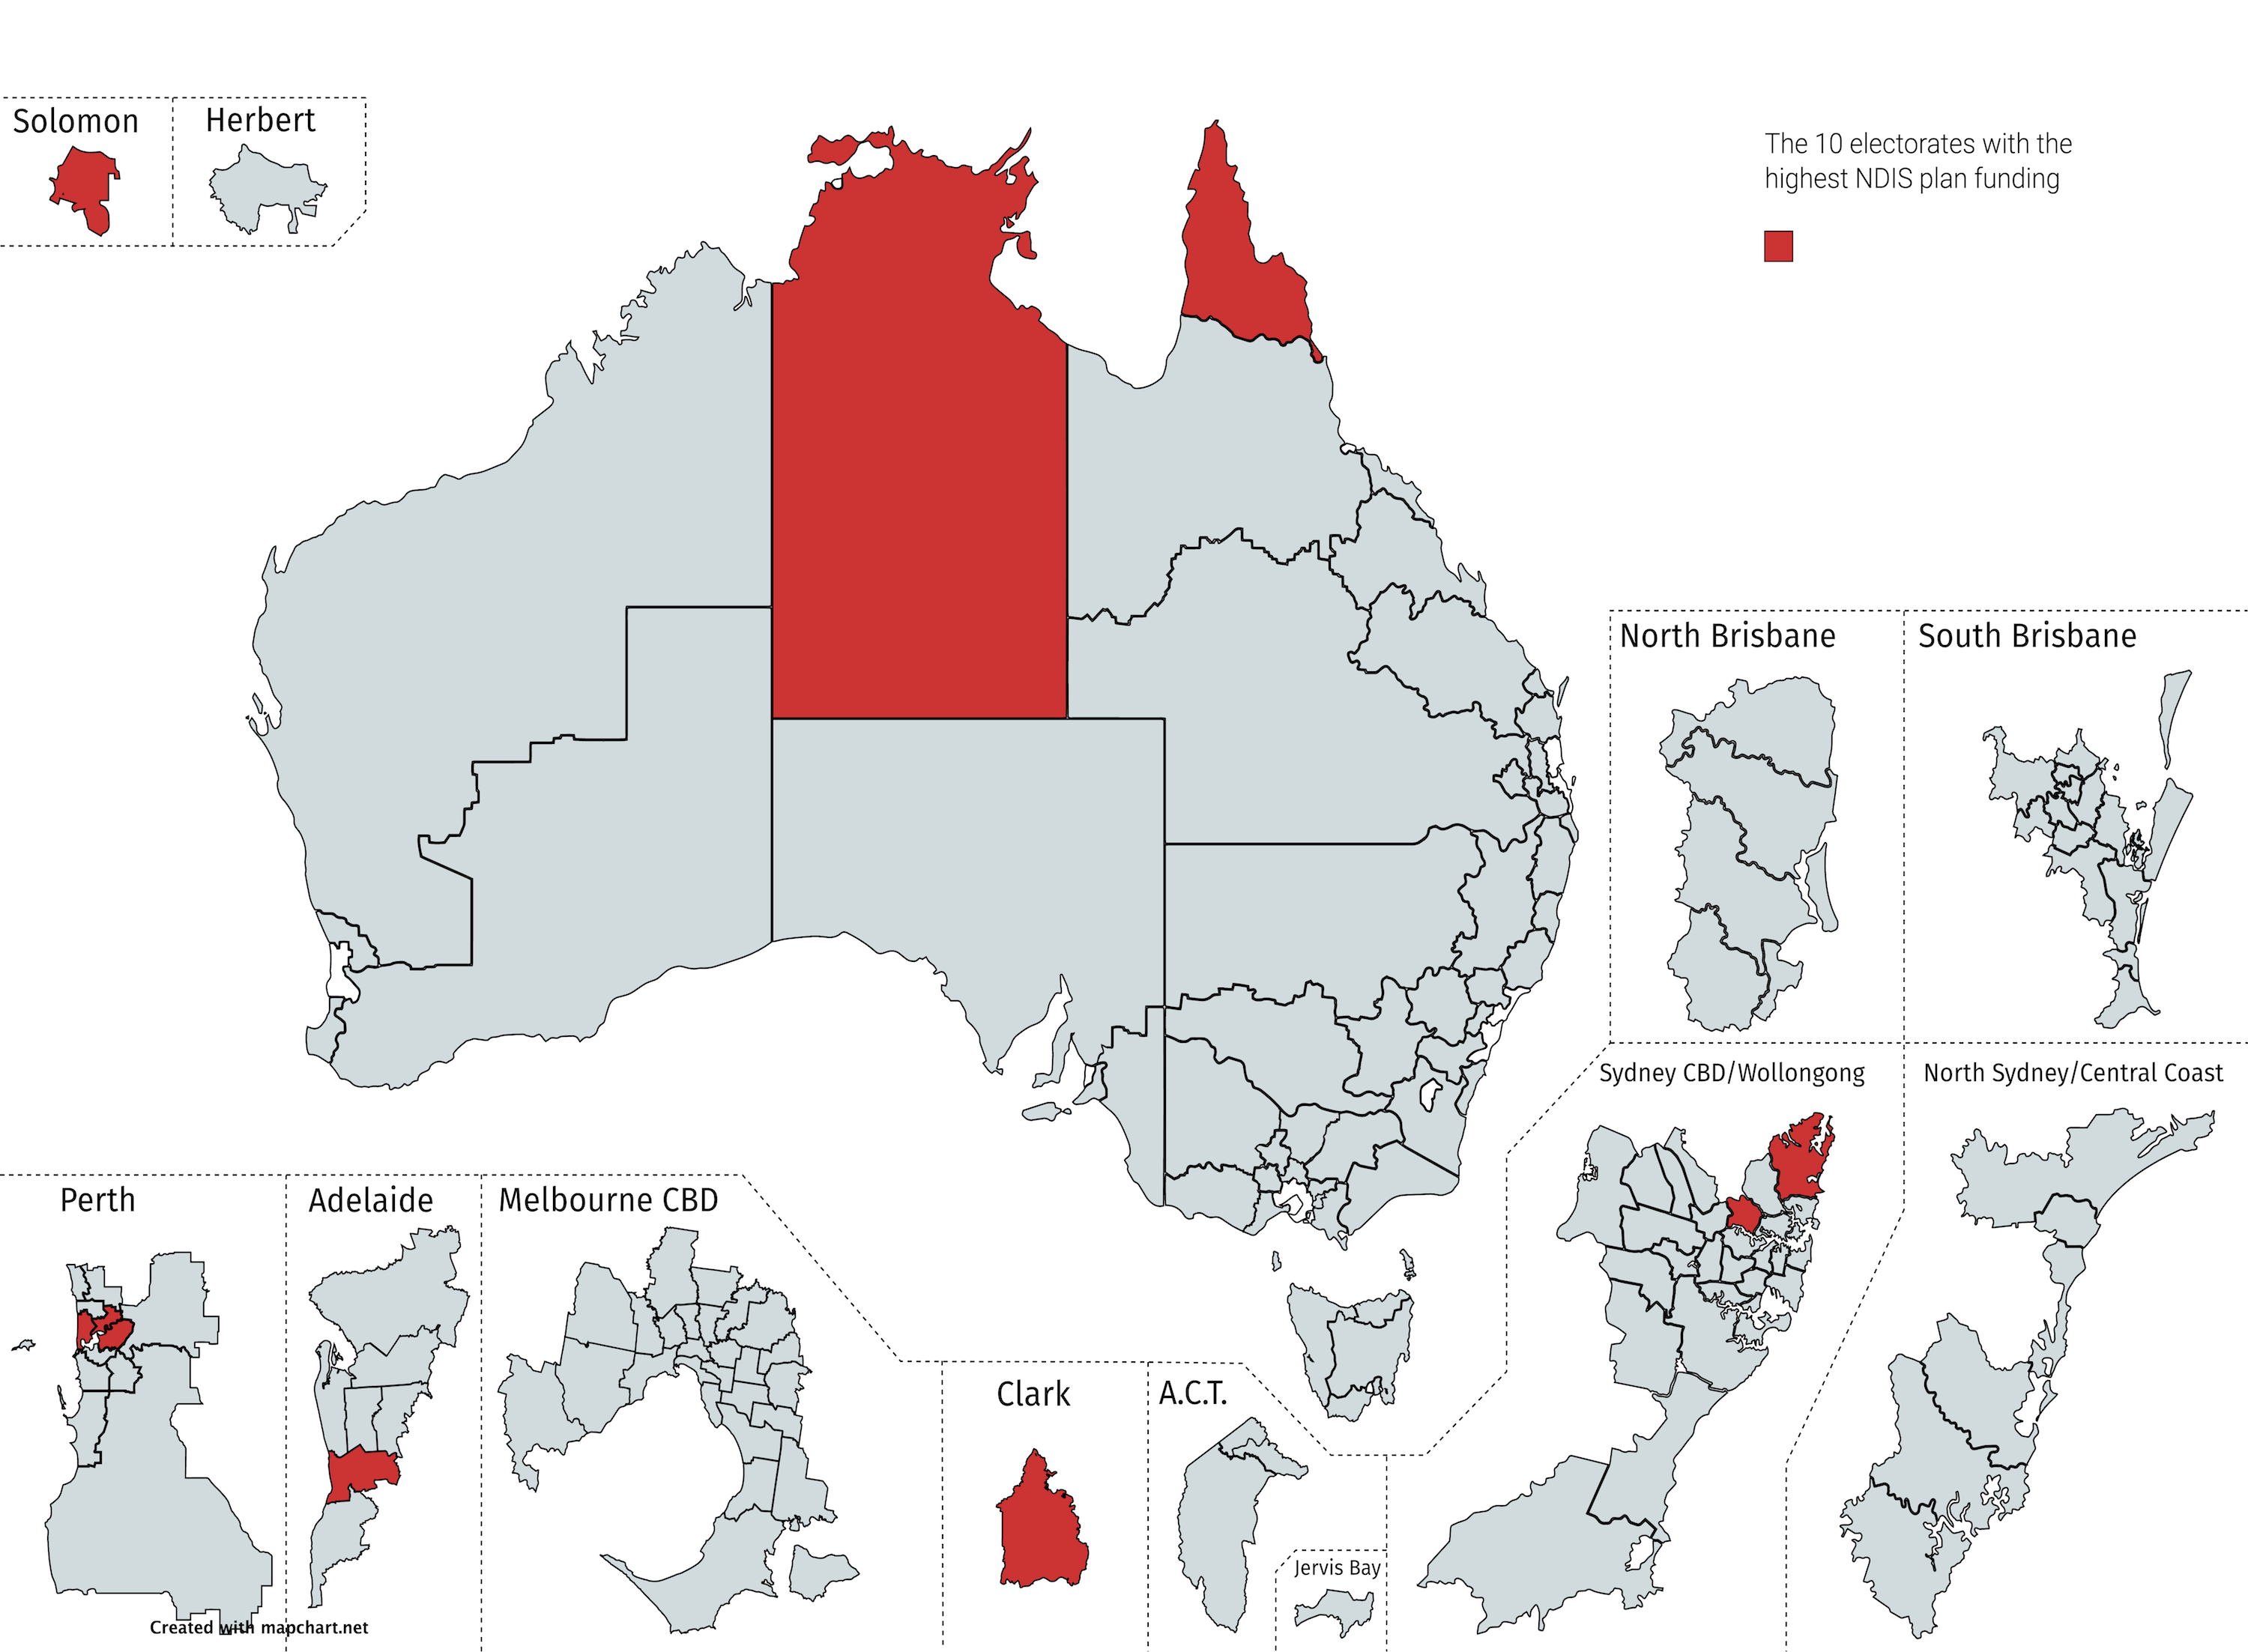 Map of Australian electorates. The 10 electorates listed below are shaded red. It includes far north Queensland, almost all of the NT, and some places near cities like Perth, Adelaide, Hobart and Sydney. The regional areas in the NT and QLD stand out the most. 